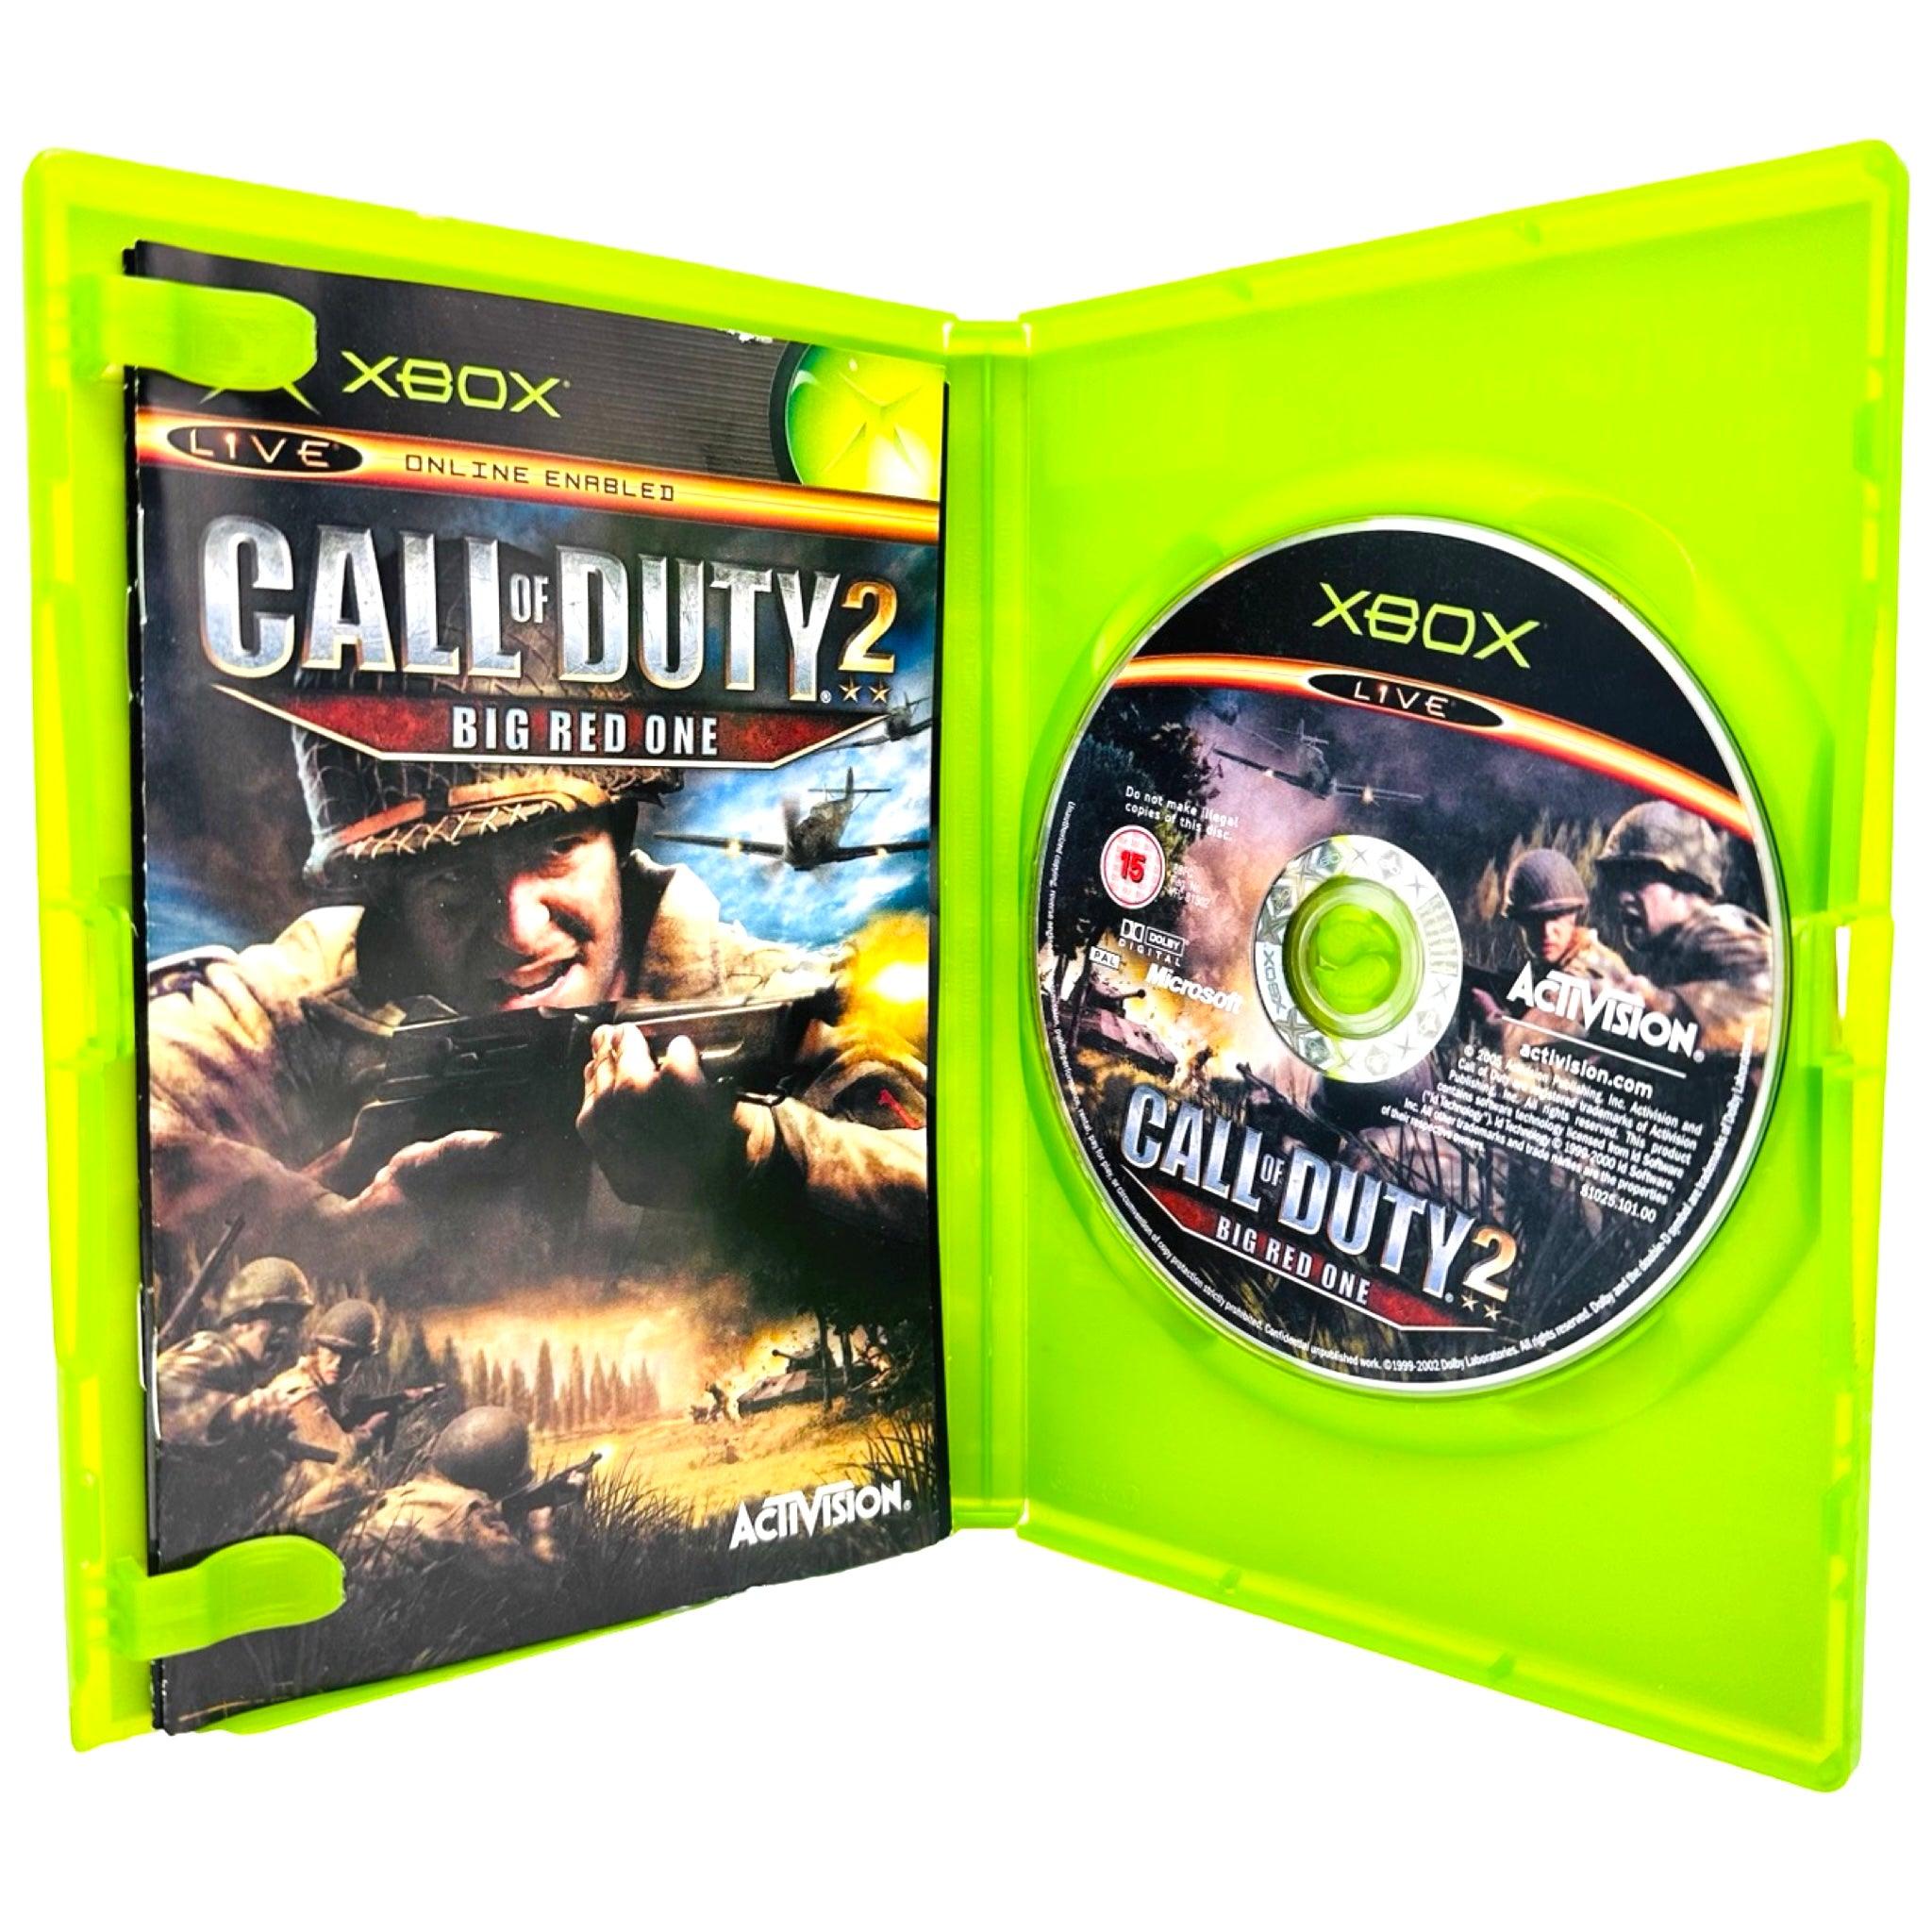 Xbox: Call Of Duty 2: Big Red One - RetroGaming.no